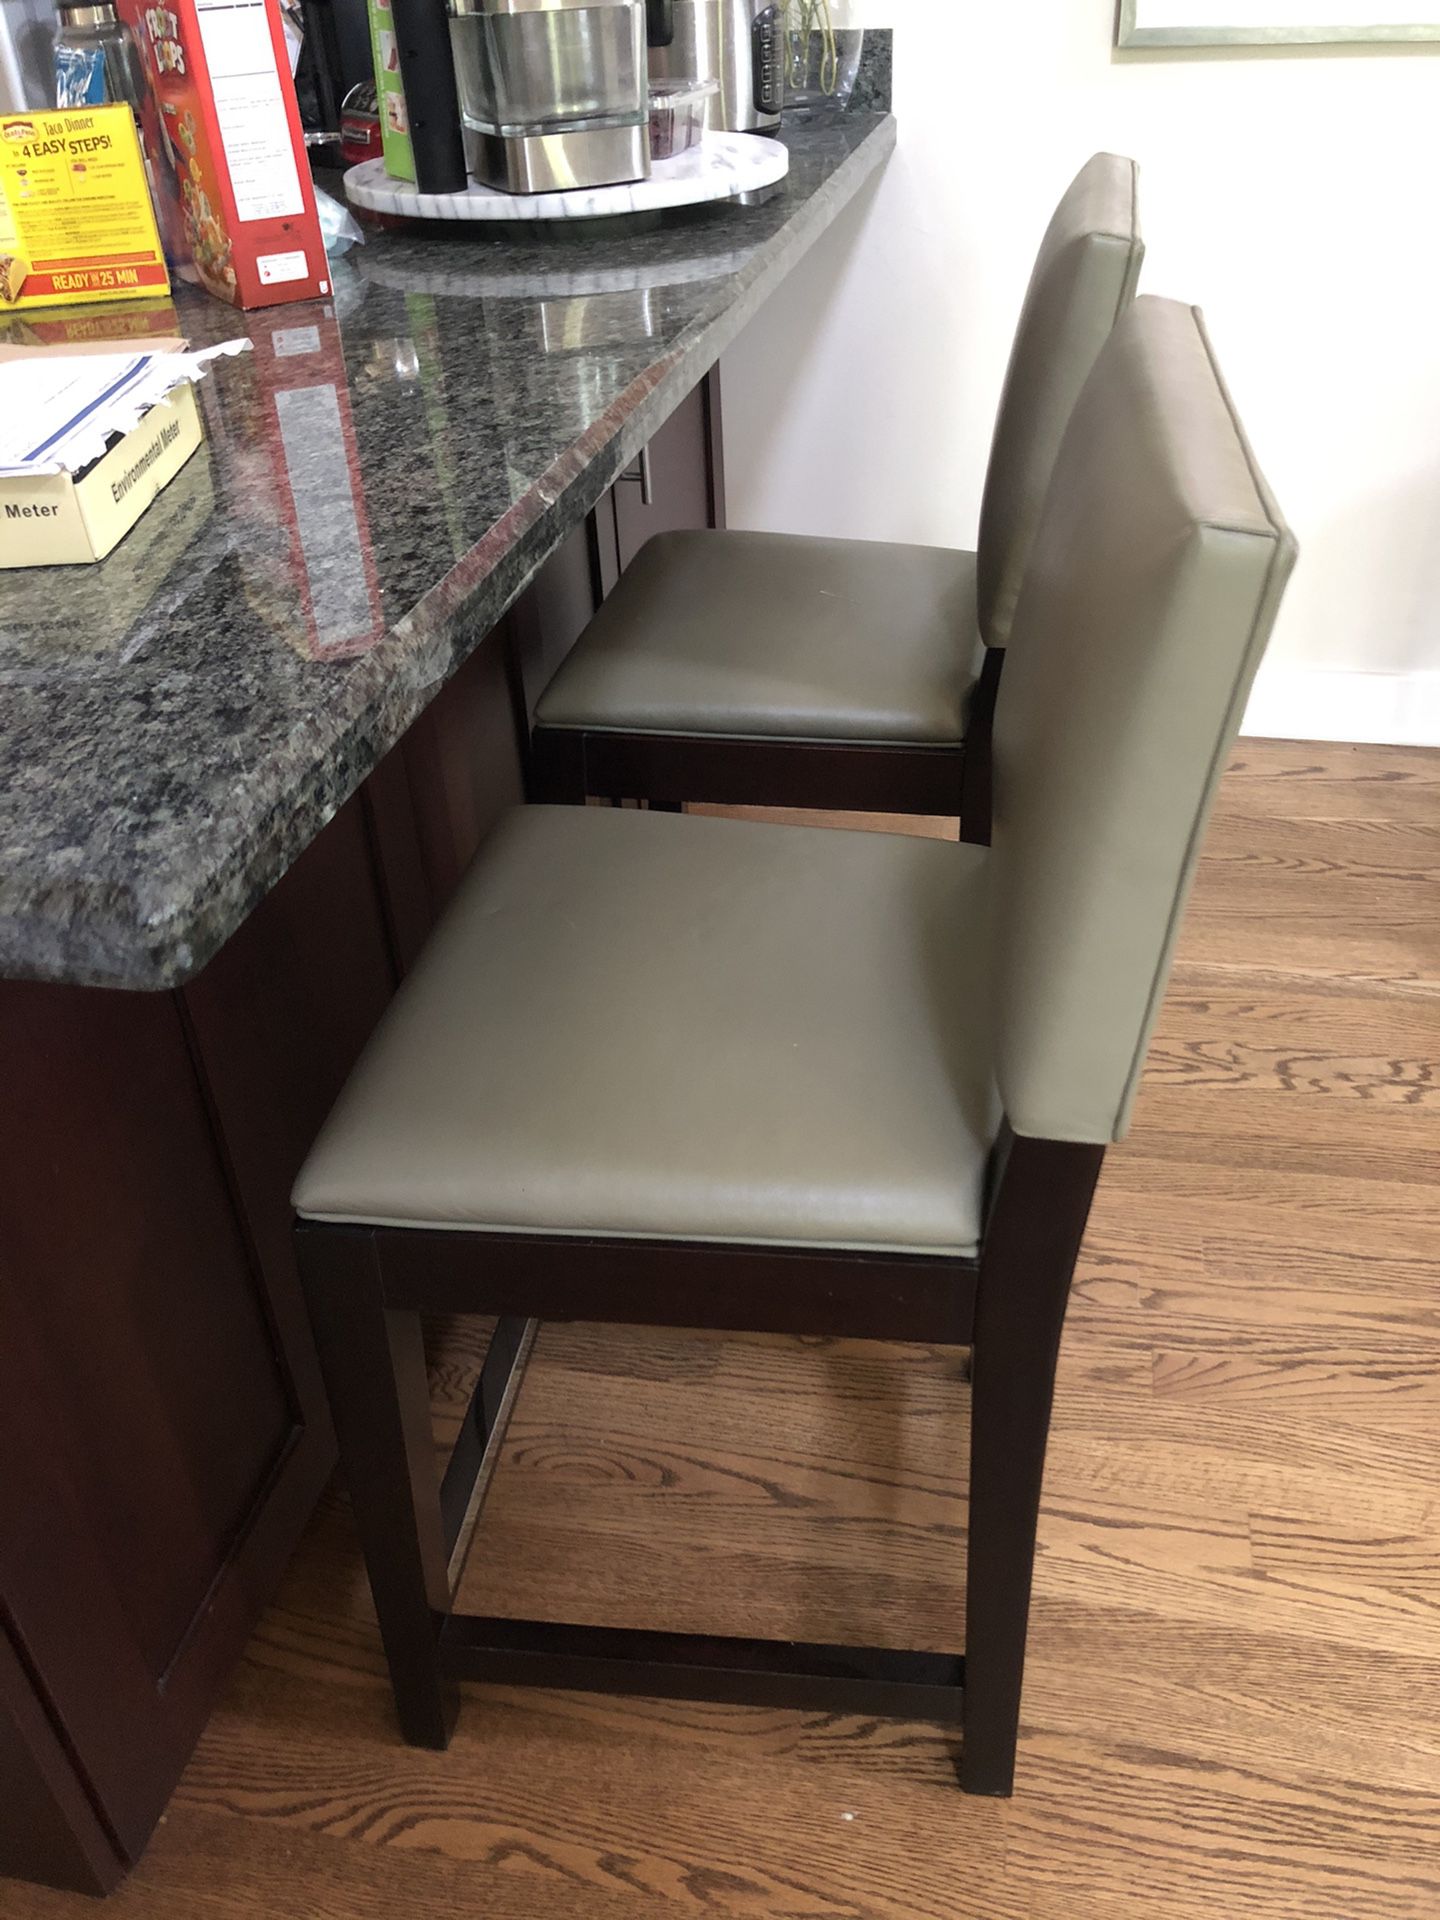 Crate and barrel Counter stools